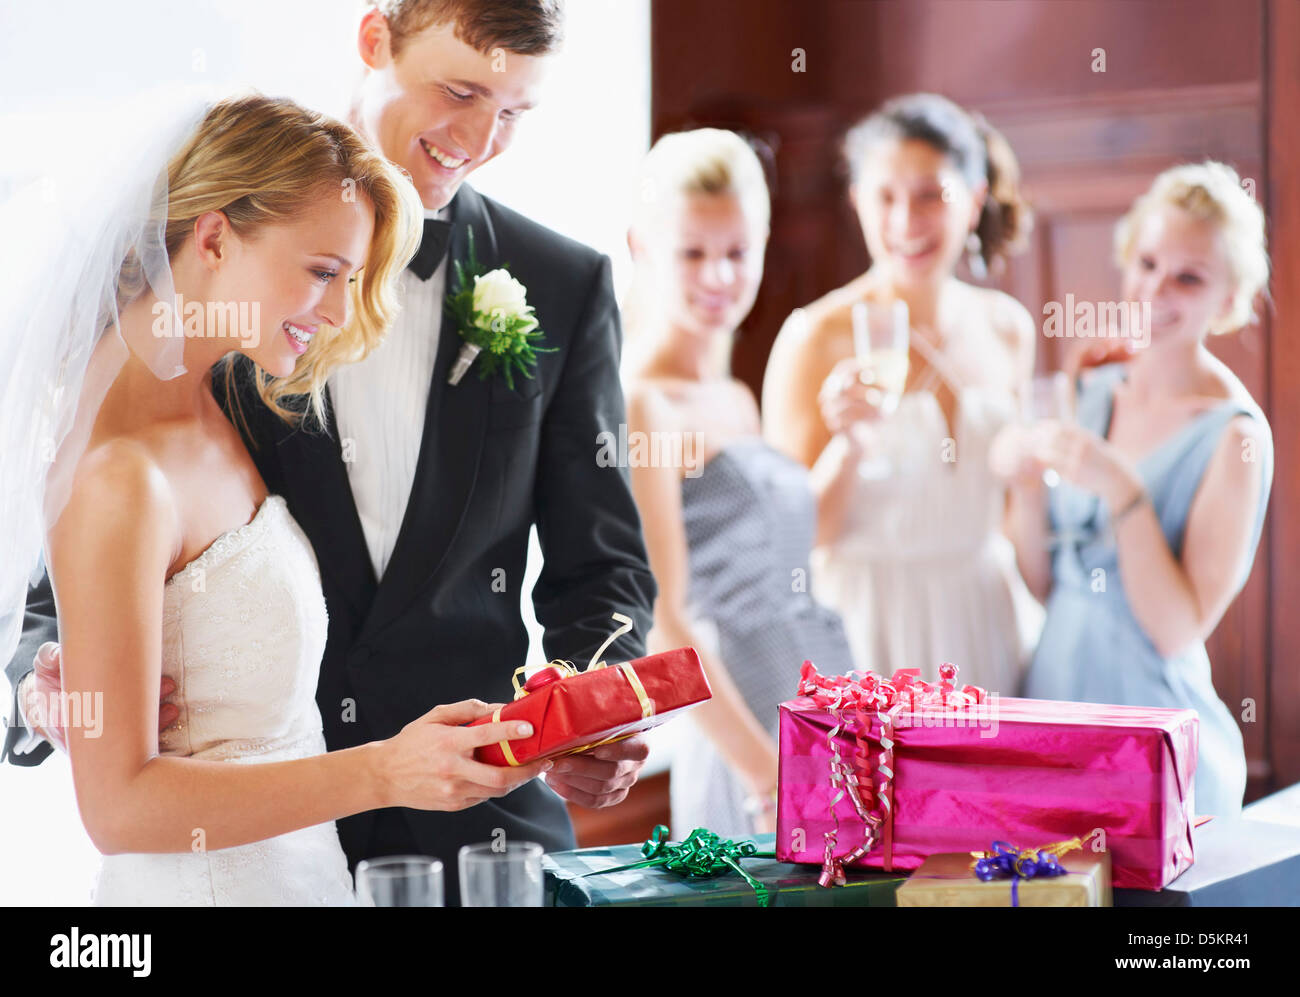 South Africa, Cape Town, Wedding couple opening gifts Stock Photo